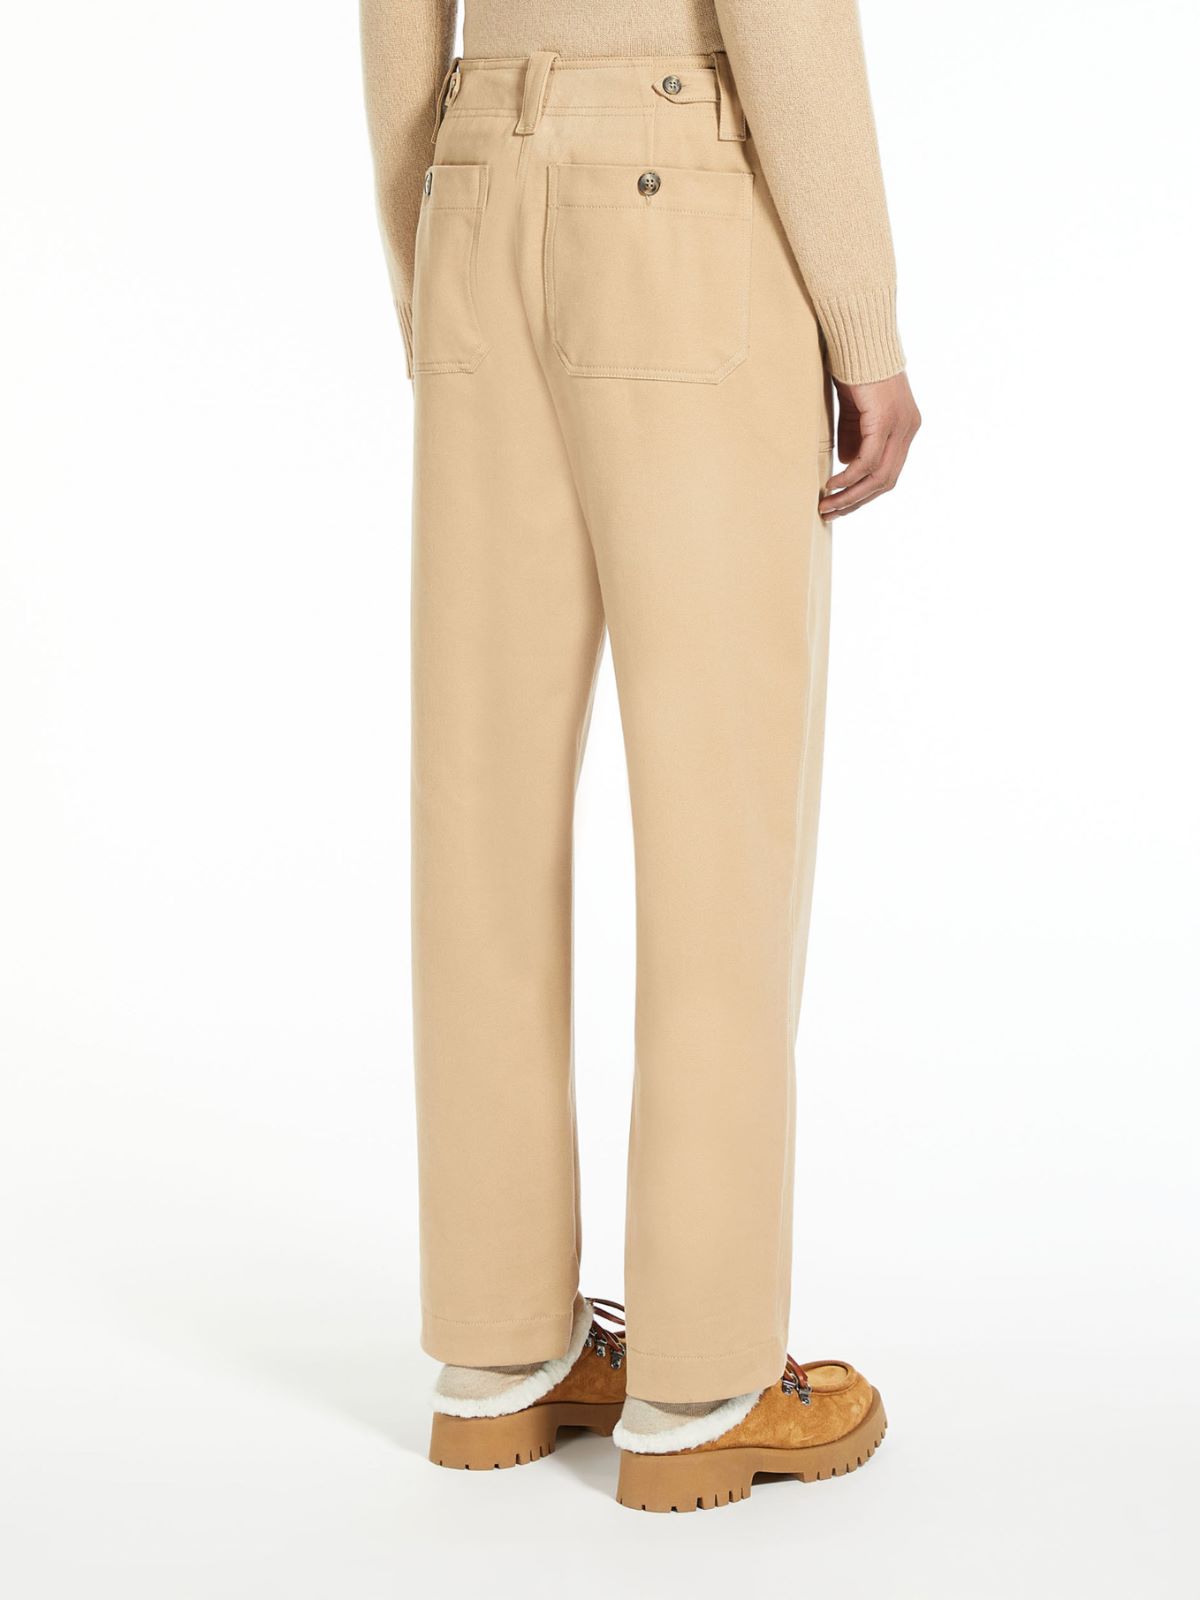 Cotton drill trousers - CAMEL - Weekend Max Mara - 3